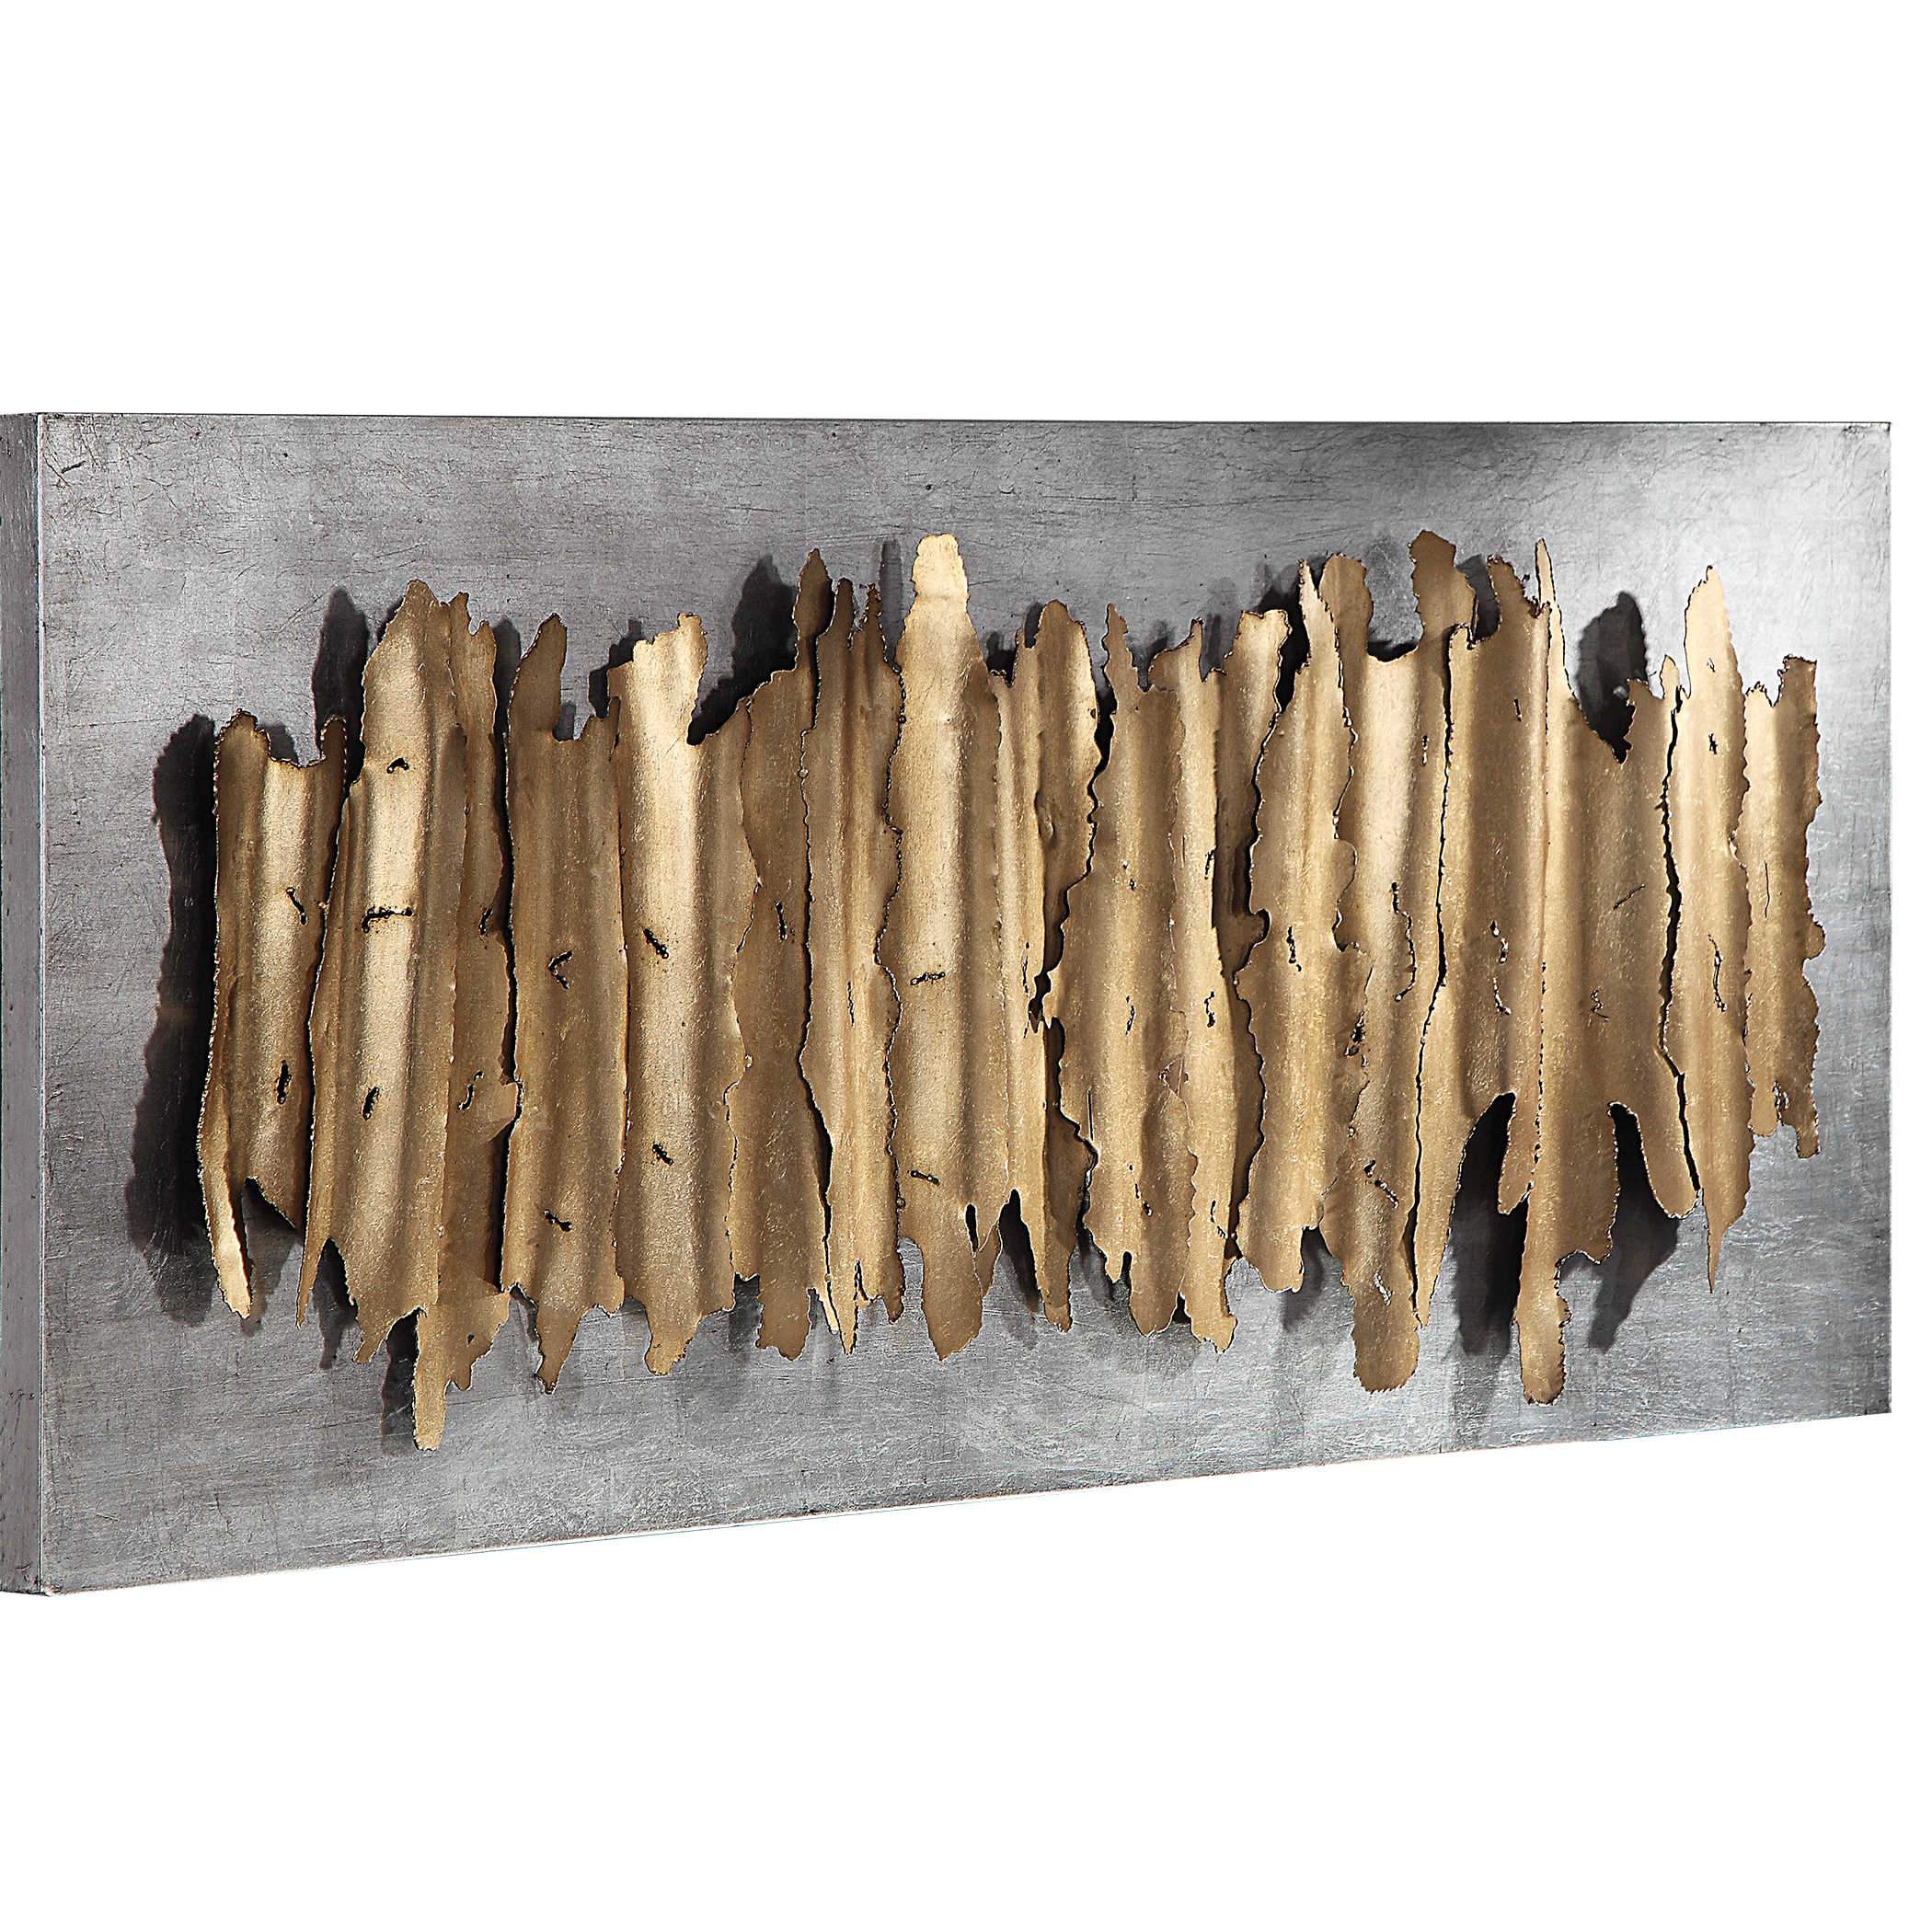 Uttermost Home Uttermost Lev Metal Wall Decor